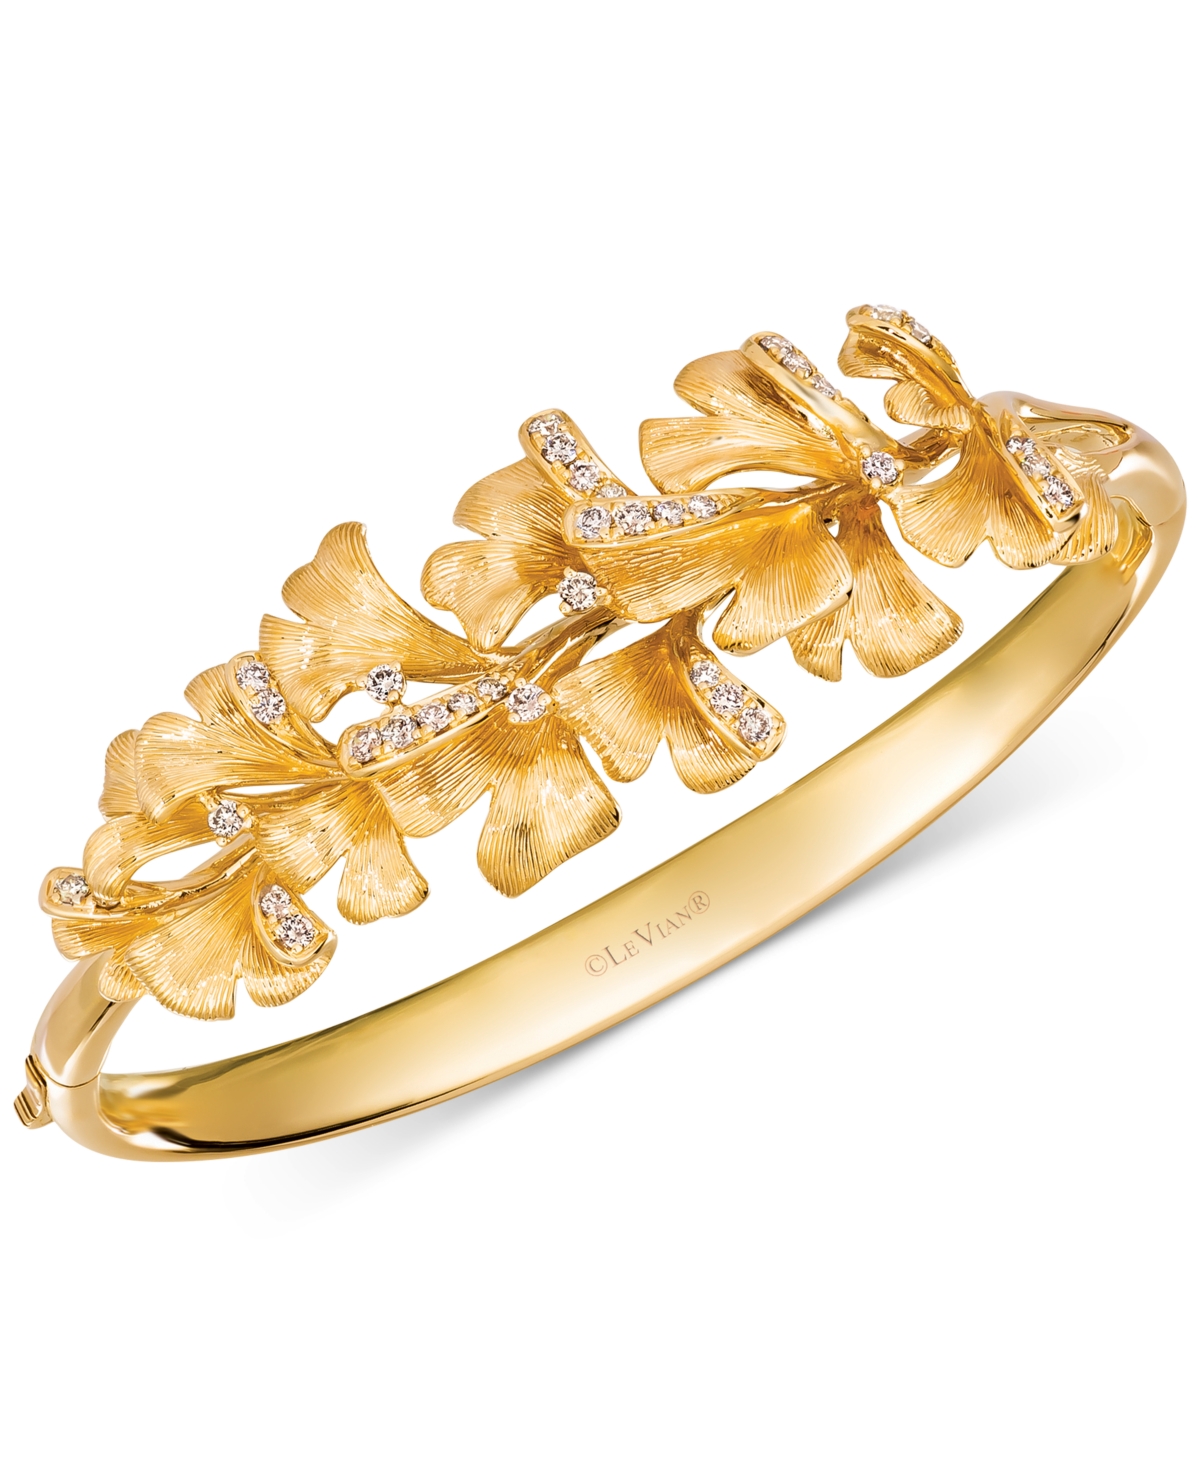 Nude Diamond Floral Bangle Bracelet (3/4 ct. t.w.) in 14k Gold - Yellow Gold